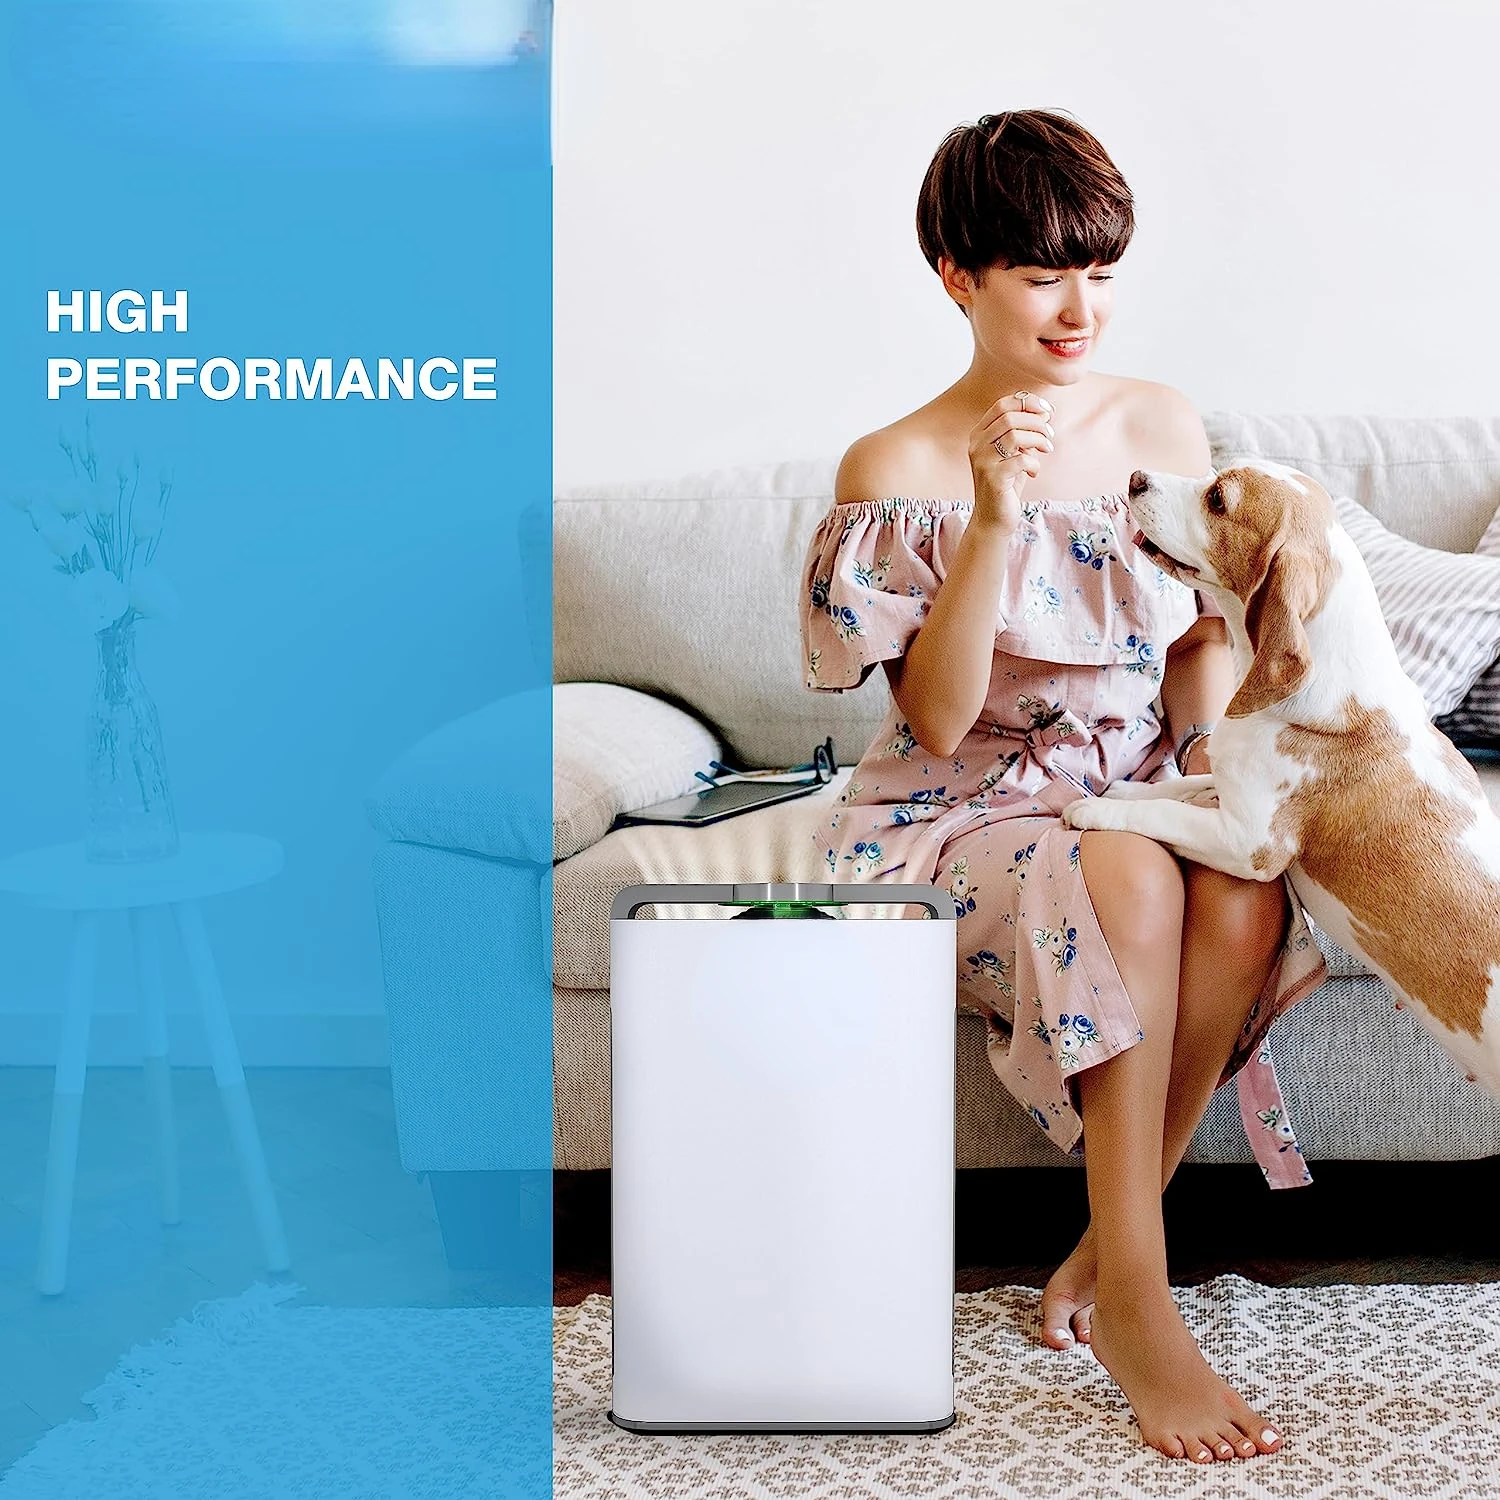 

PH950 - Hepa Air Purifiers for Home, Large Room Air Cleaner, 8-Stage Purification w/True Hepa 13 Filter, UV-A Light & Ionize